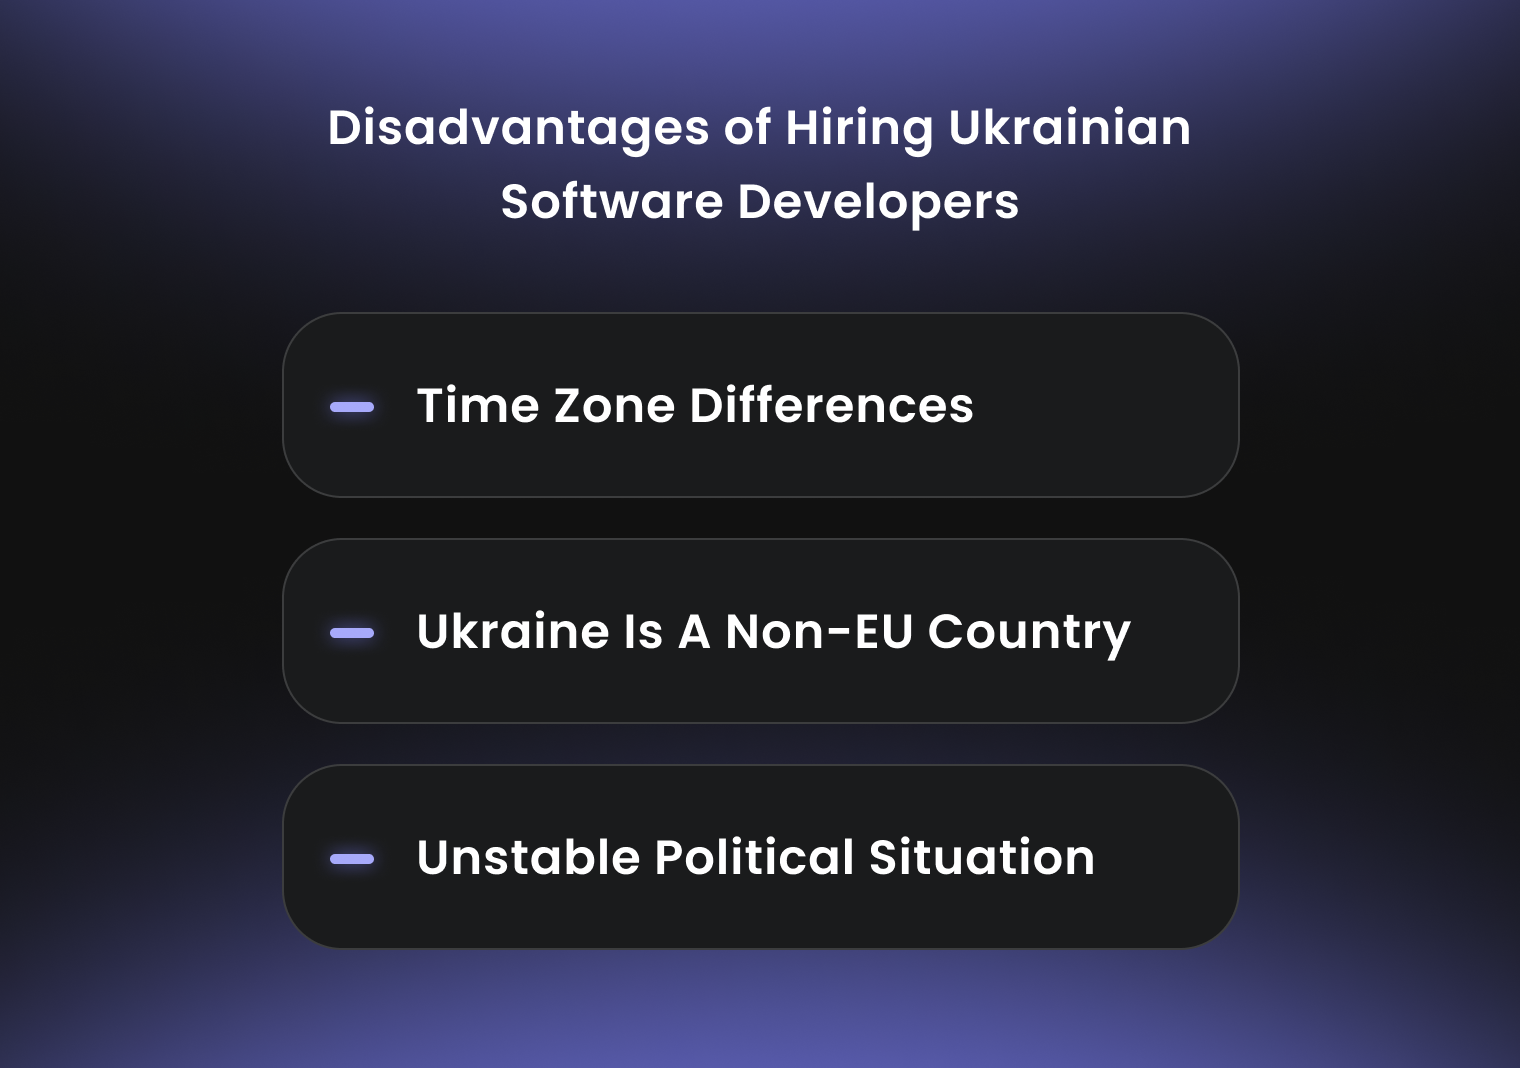 Hire Software Developers in Ukraine: Key Reasons and How to Do It? - 7